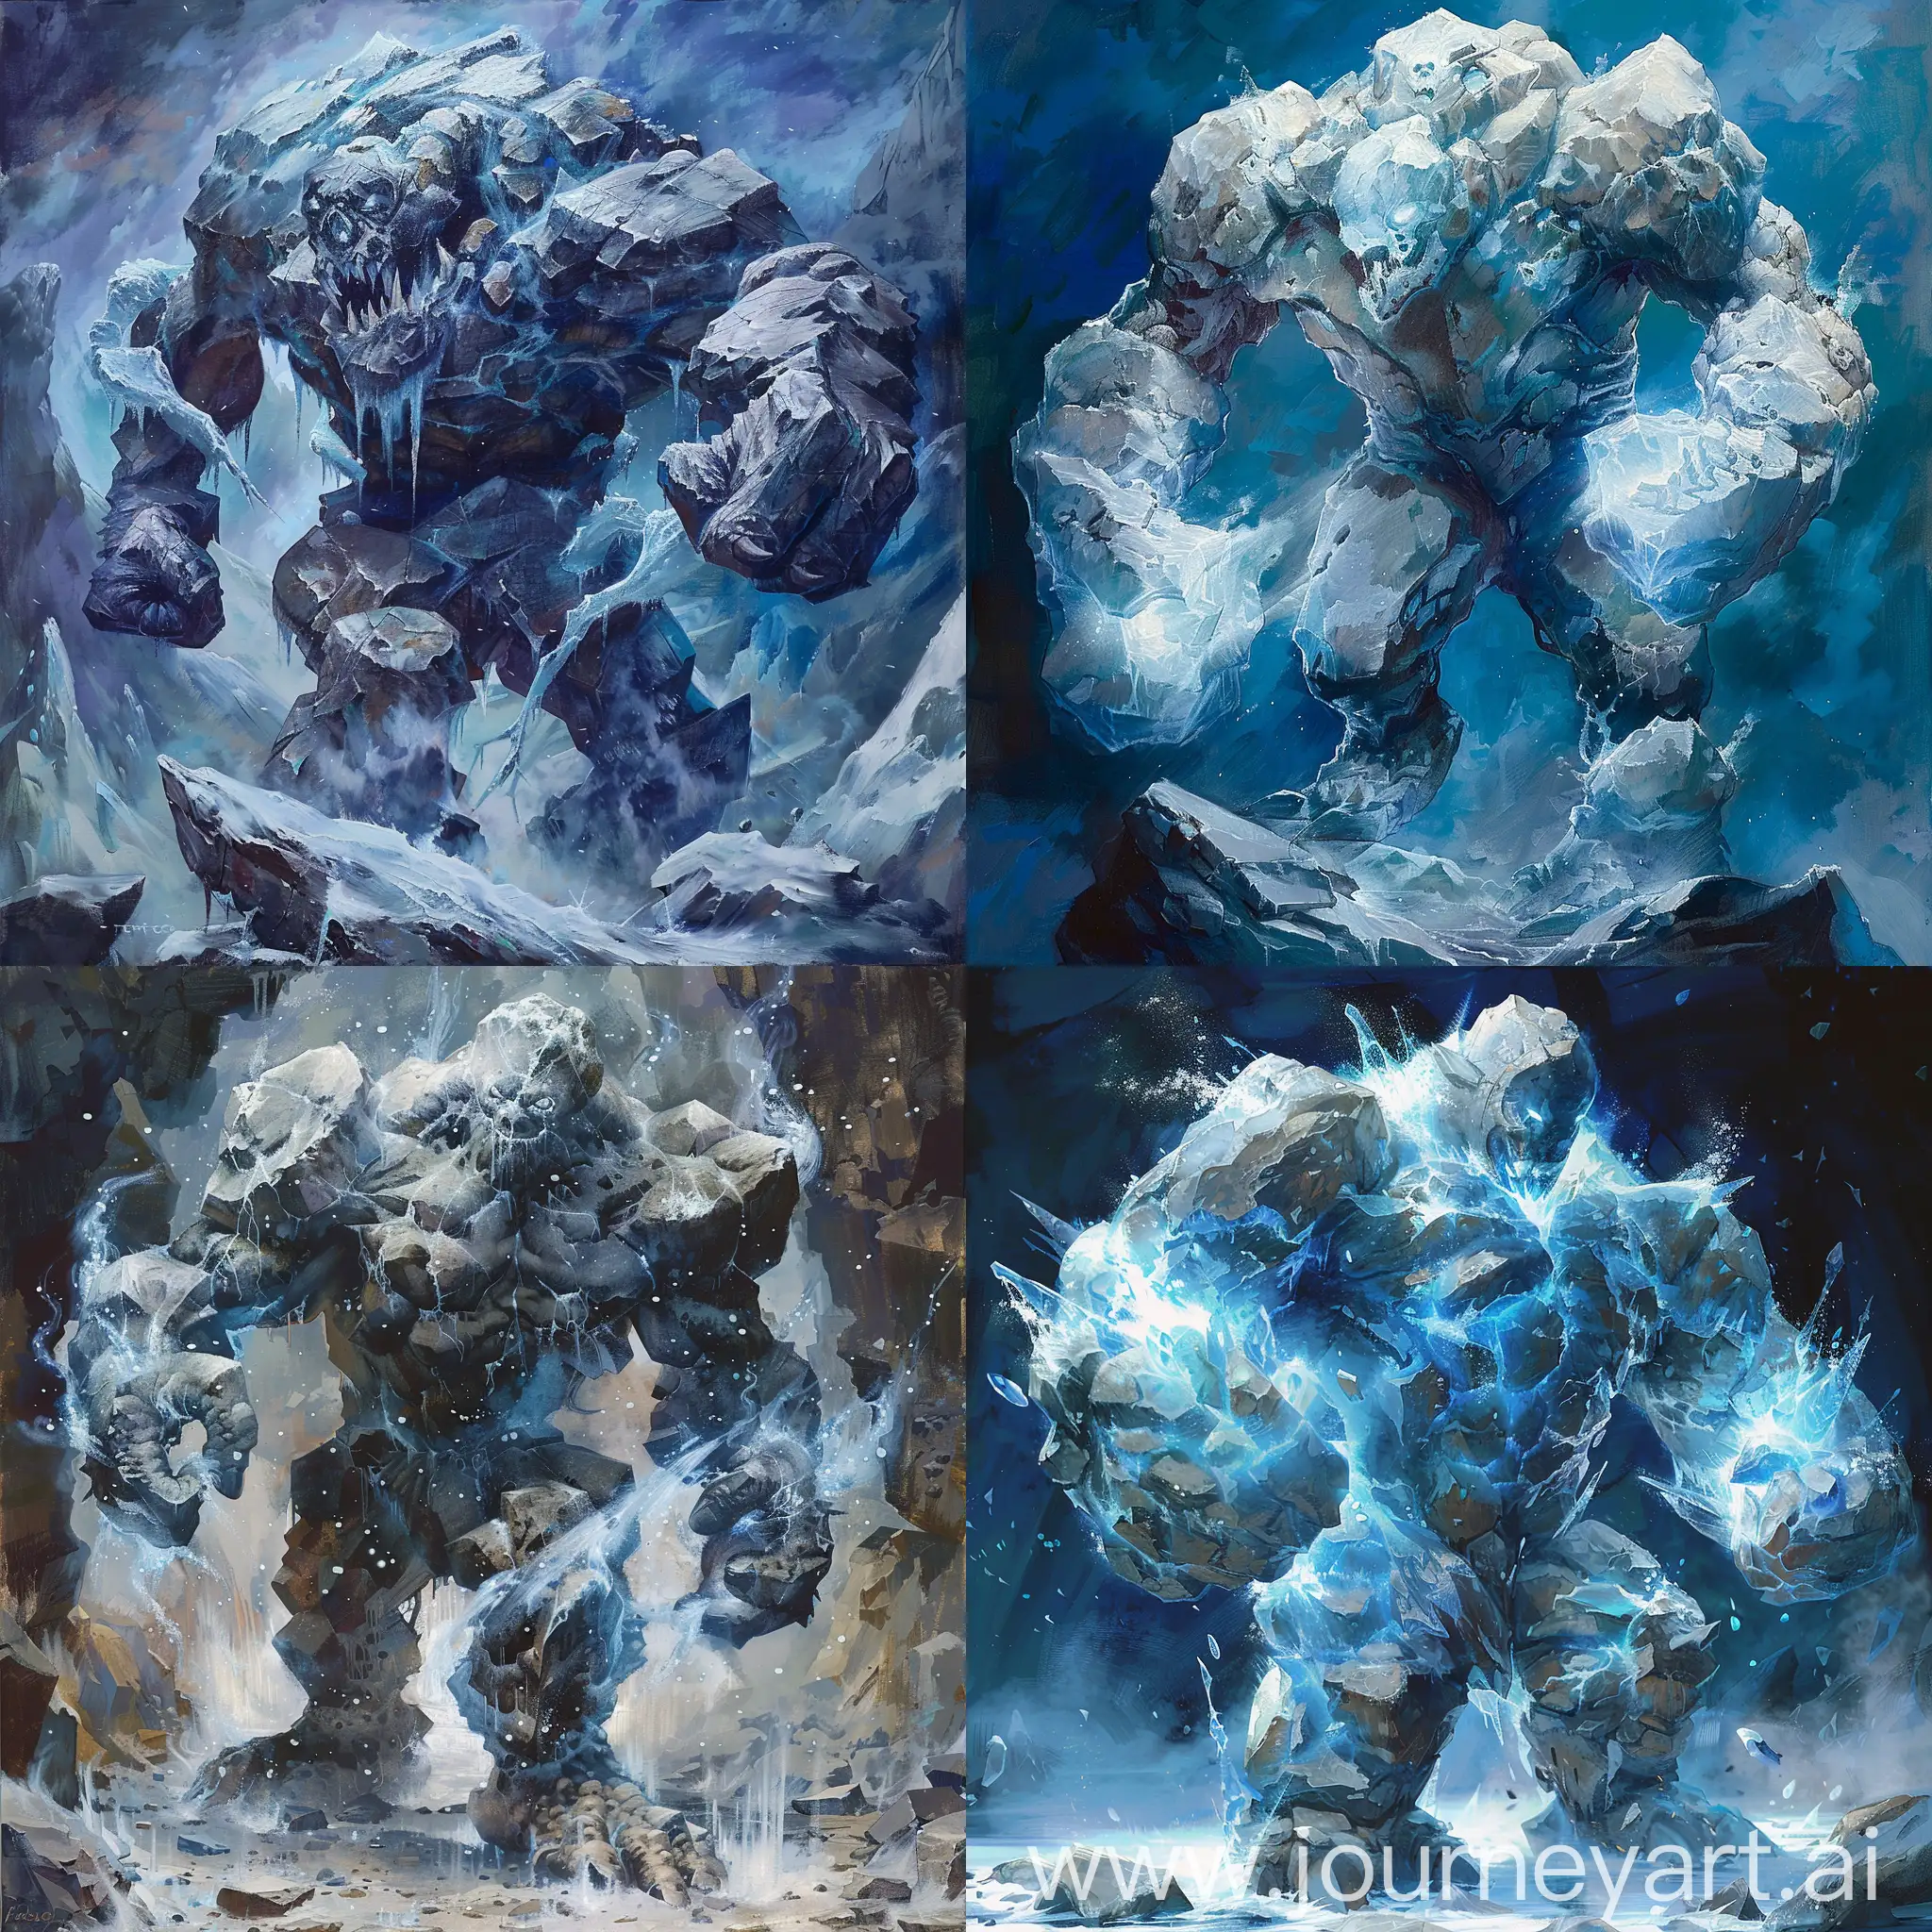 Enchanted-Stone-and-Ice-Golem-in-Terese-Nielsen-Oil-Painting-Style